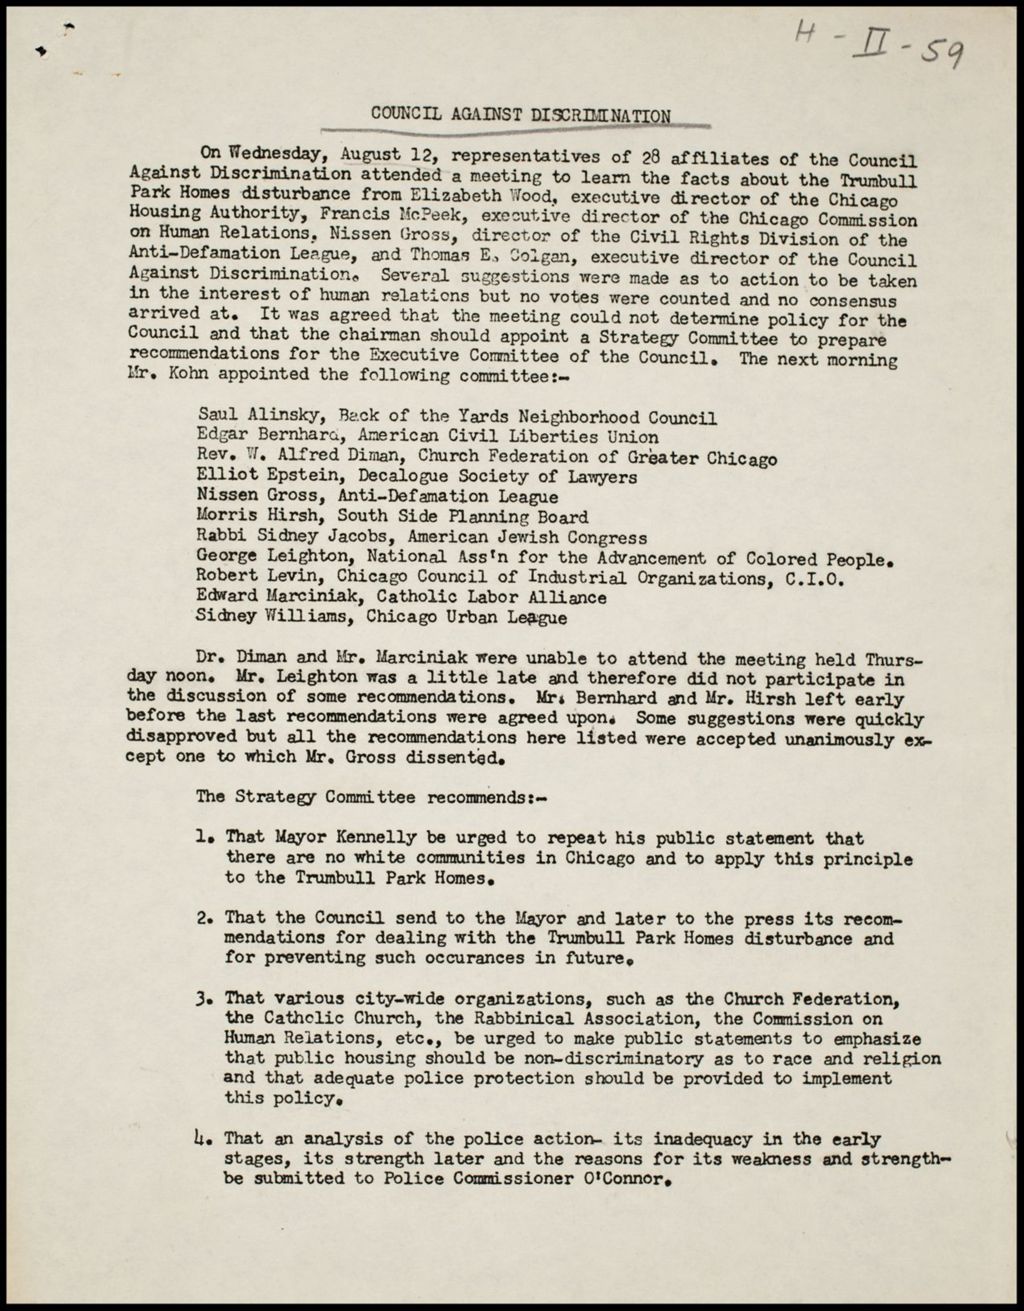 Miniature of Chicago Council Against Racial and Religious Discrimination - Trumbull Park Homes Committee, 1953-1954 (Folder I-2643)